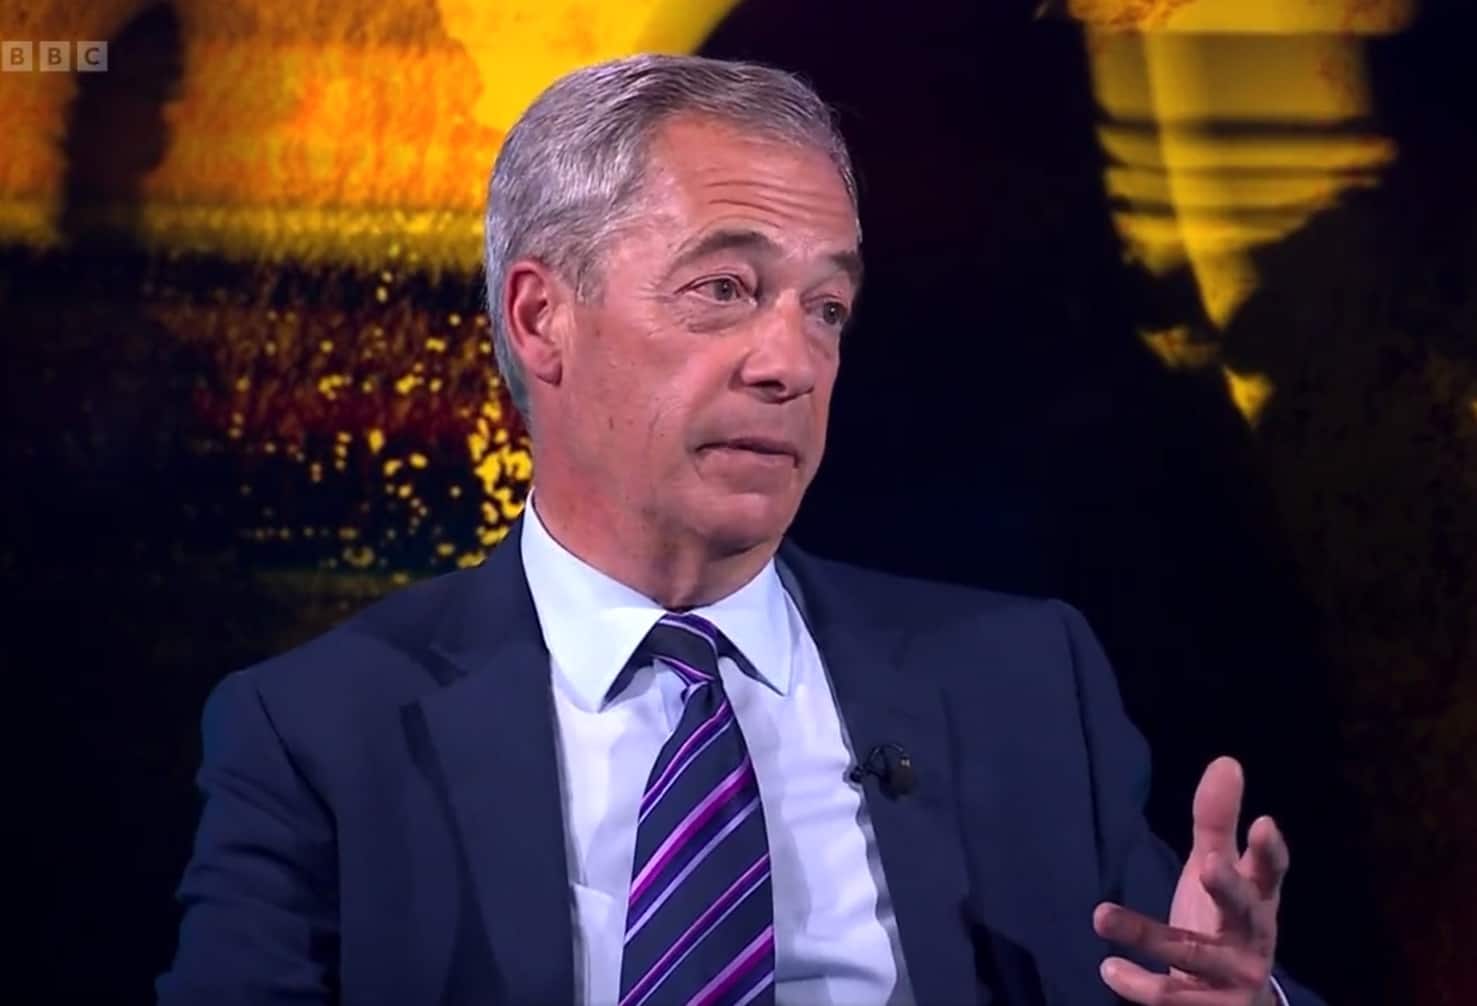 Farage trends with ‘Coutts’ as ‘man of the people’ has his bank account closed